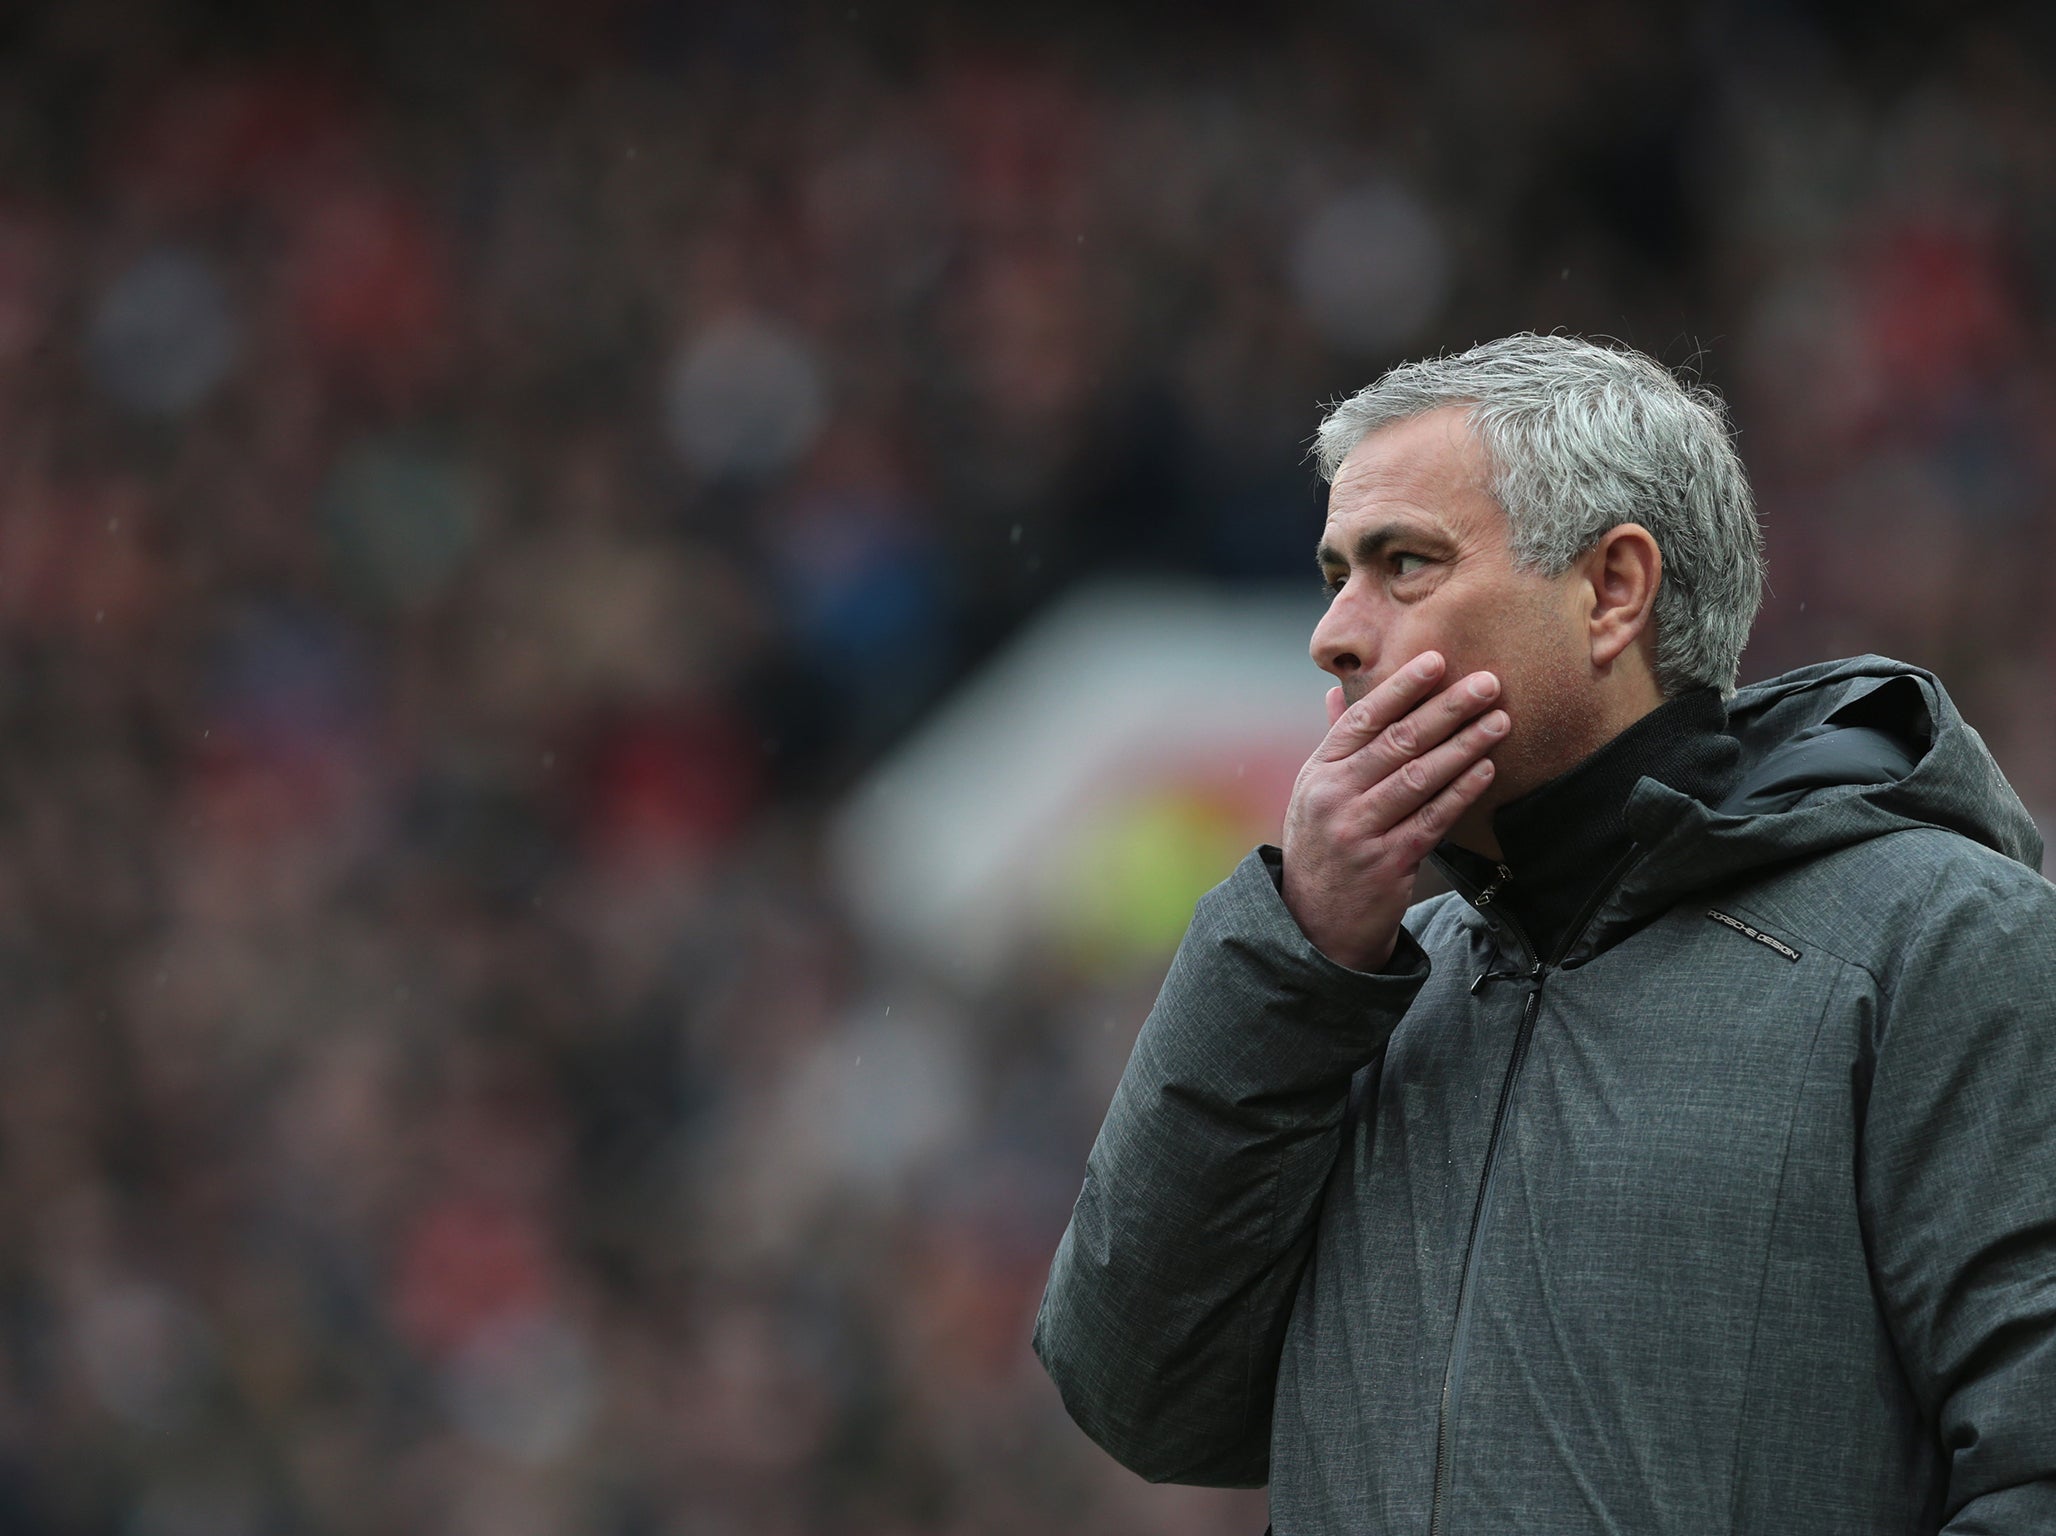 Jose Mourinho was not happy with the atmosphere